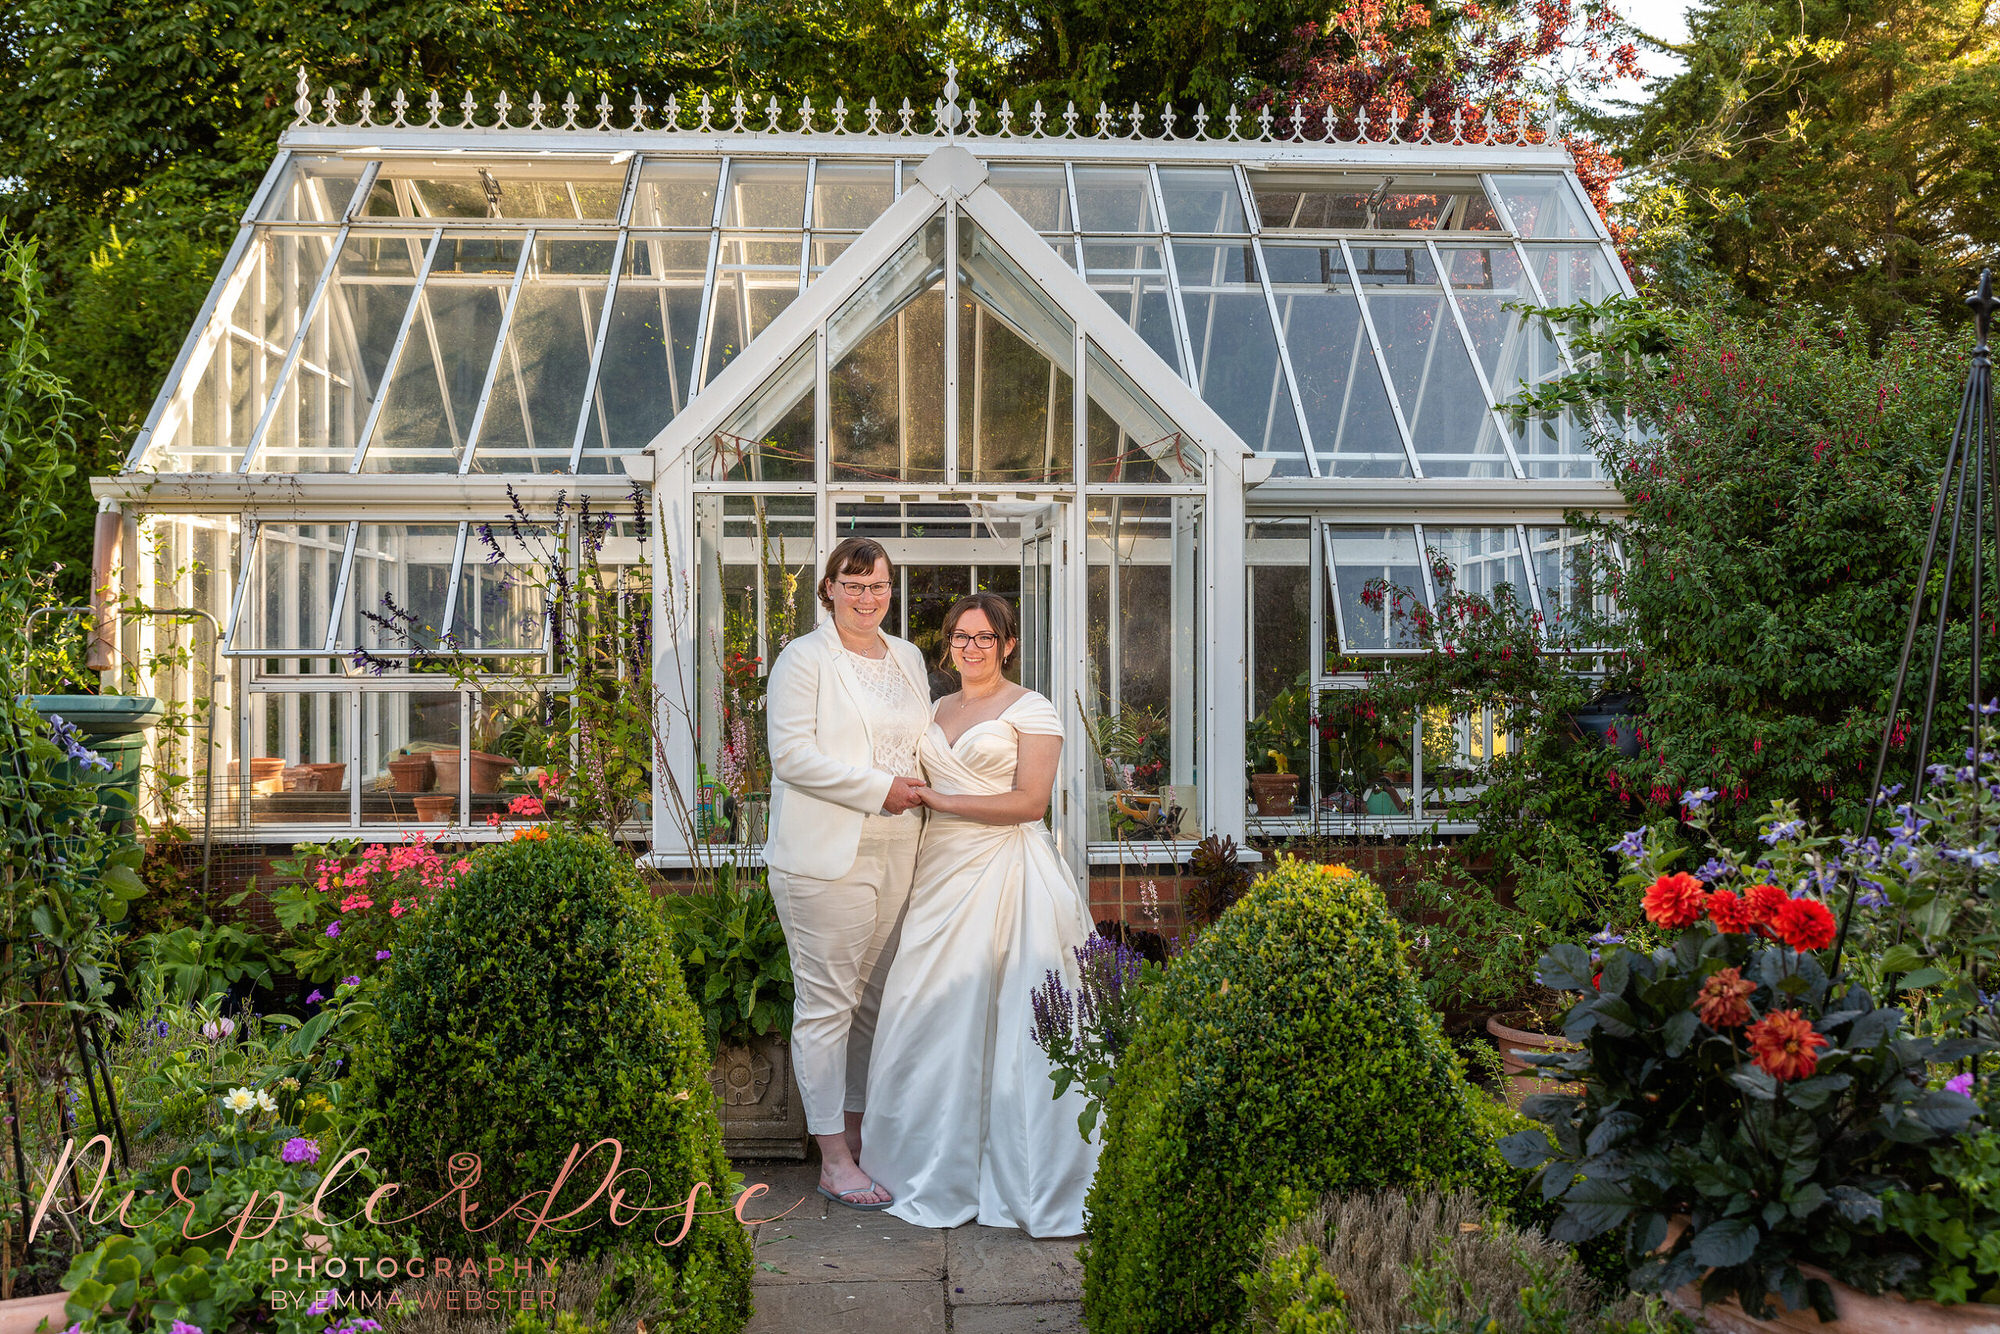 Brides stood in front of a green house